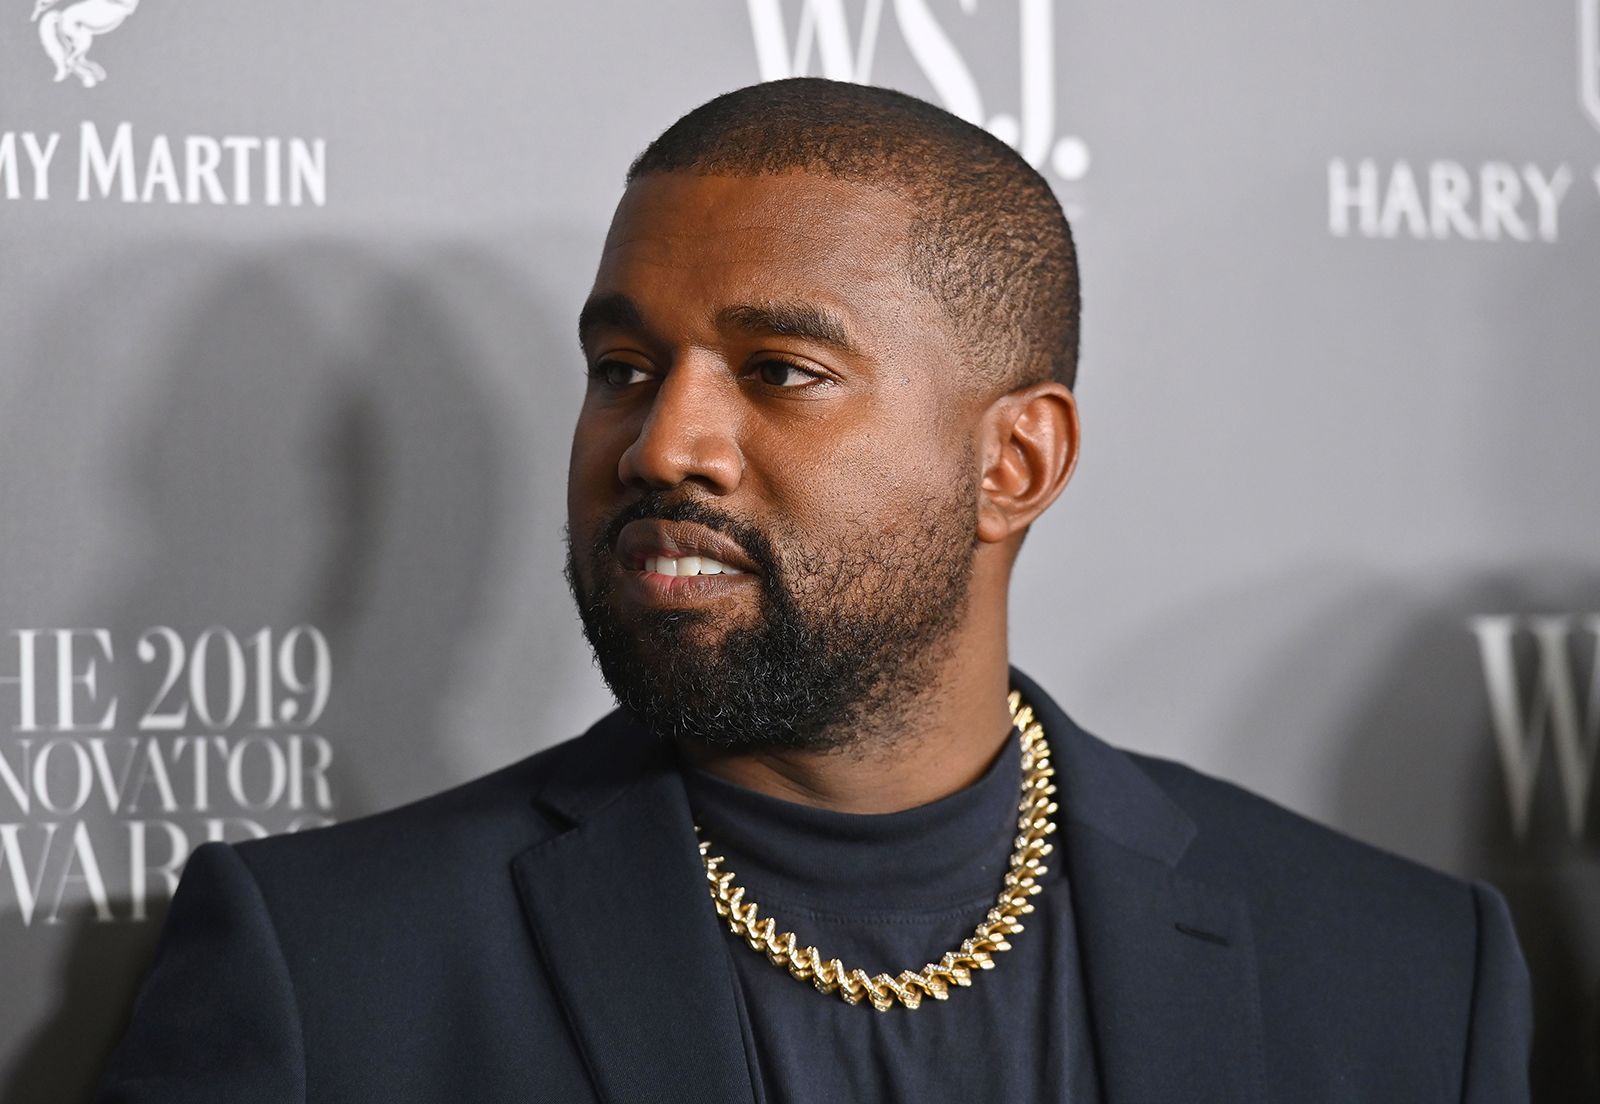 Kanye West could be denied entry to Australia over anti-Semitic remarks,  minister says | CNN